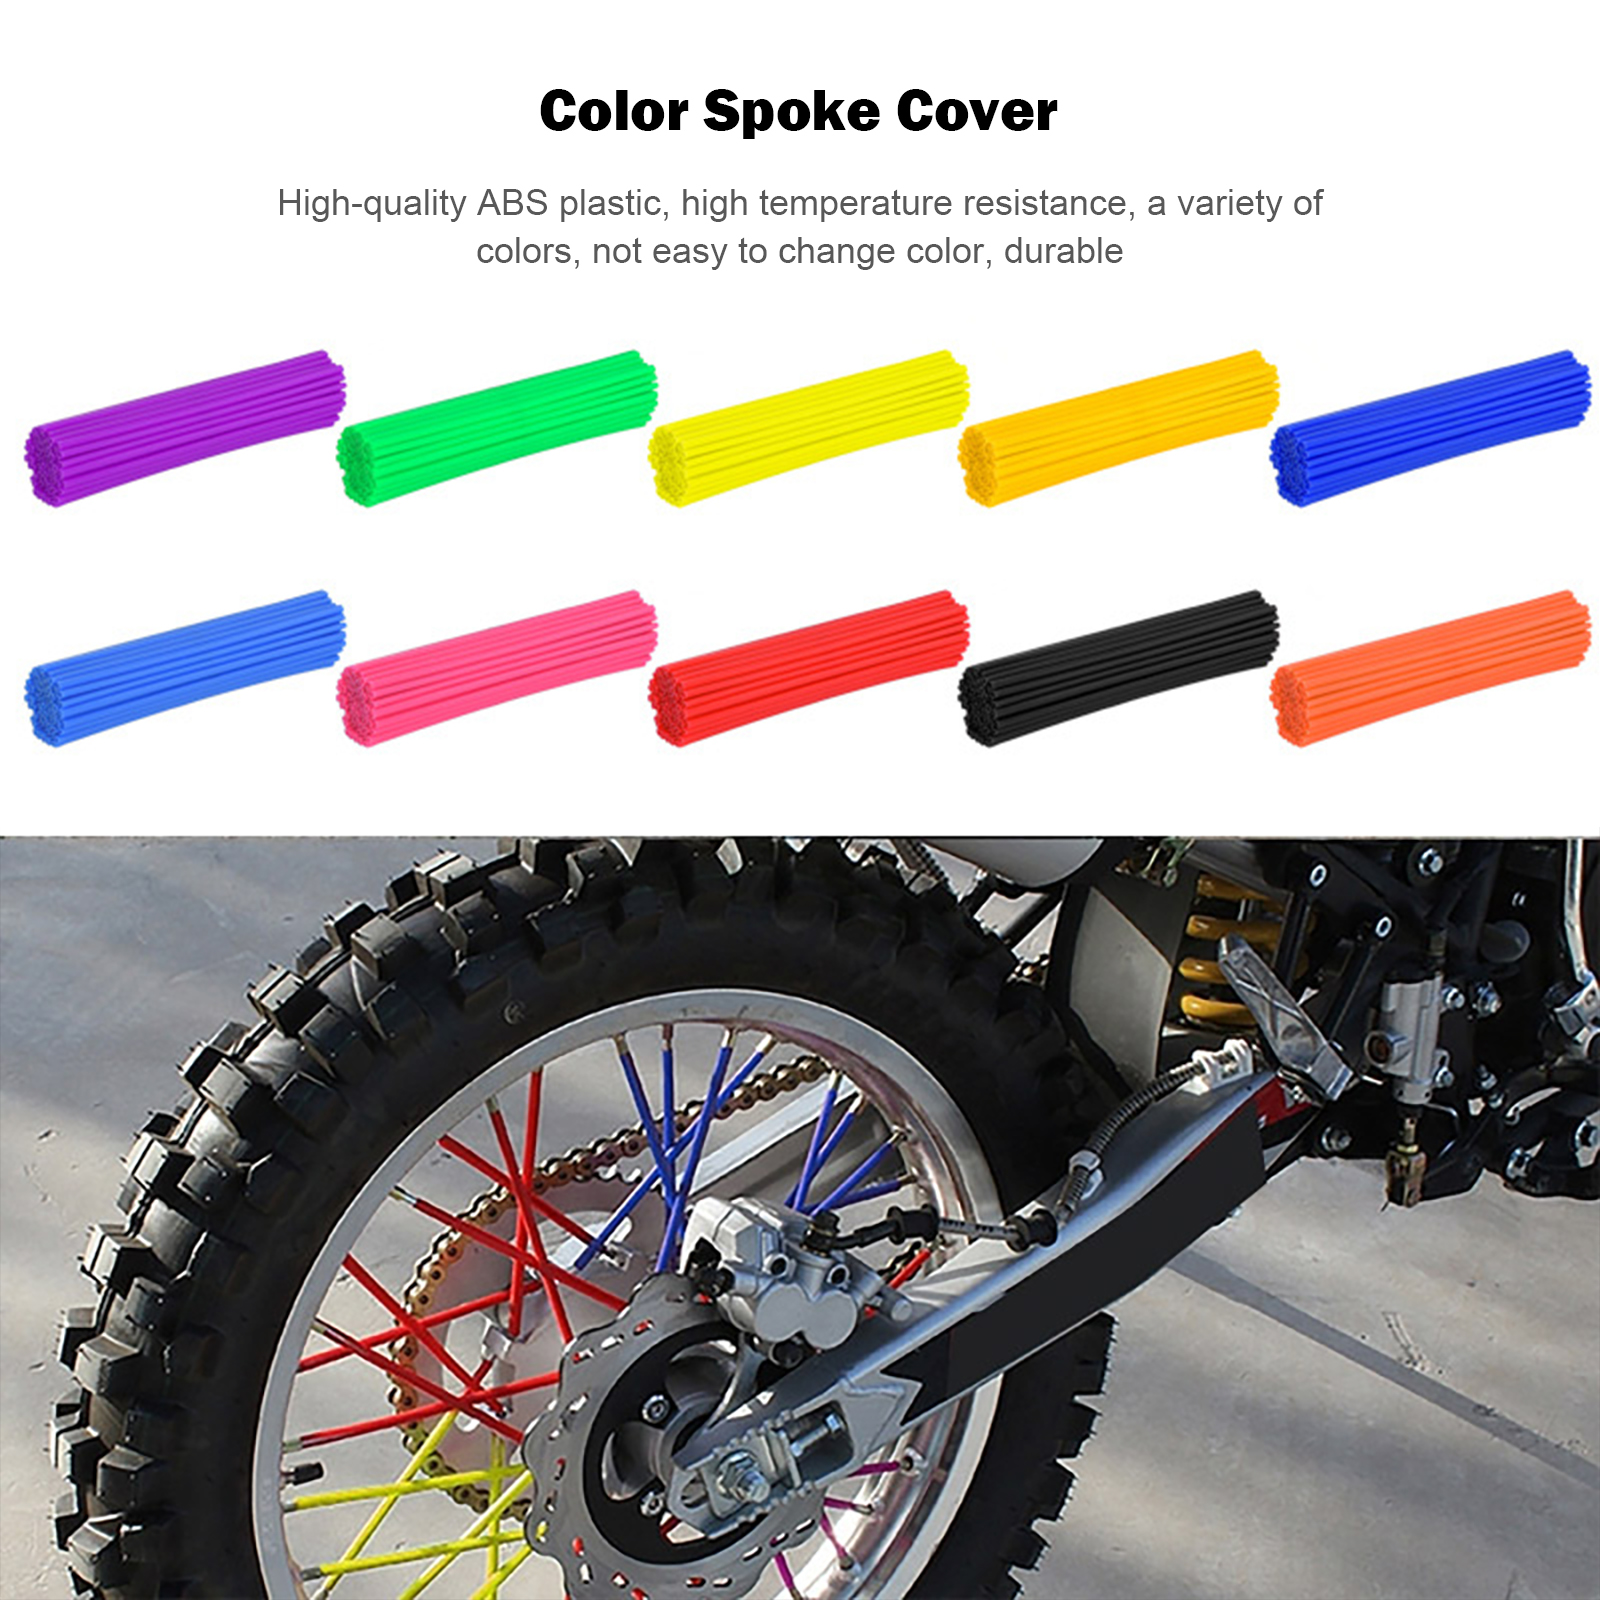 72st Motorcykelhjul Spoked Protector Wraps Rims Skin Trim Covers Pipe For Motocross Bicycle Bike Cool Accessories 11 Färger